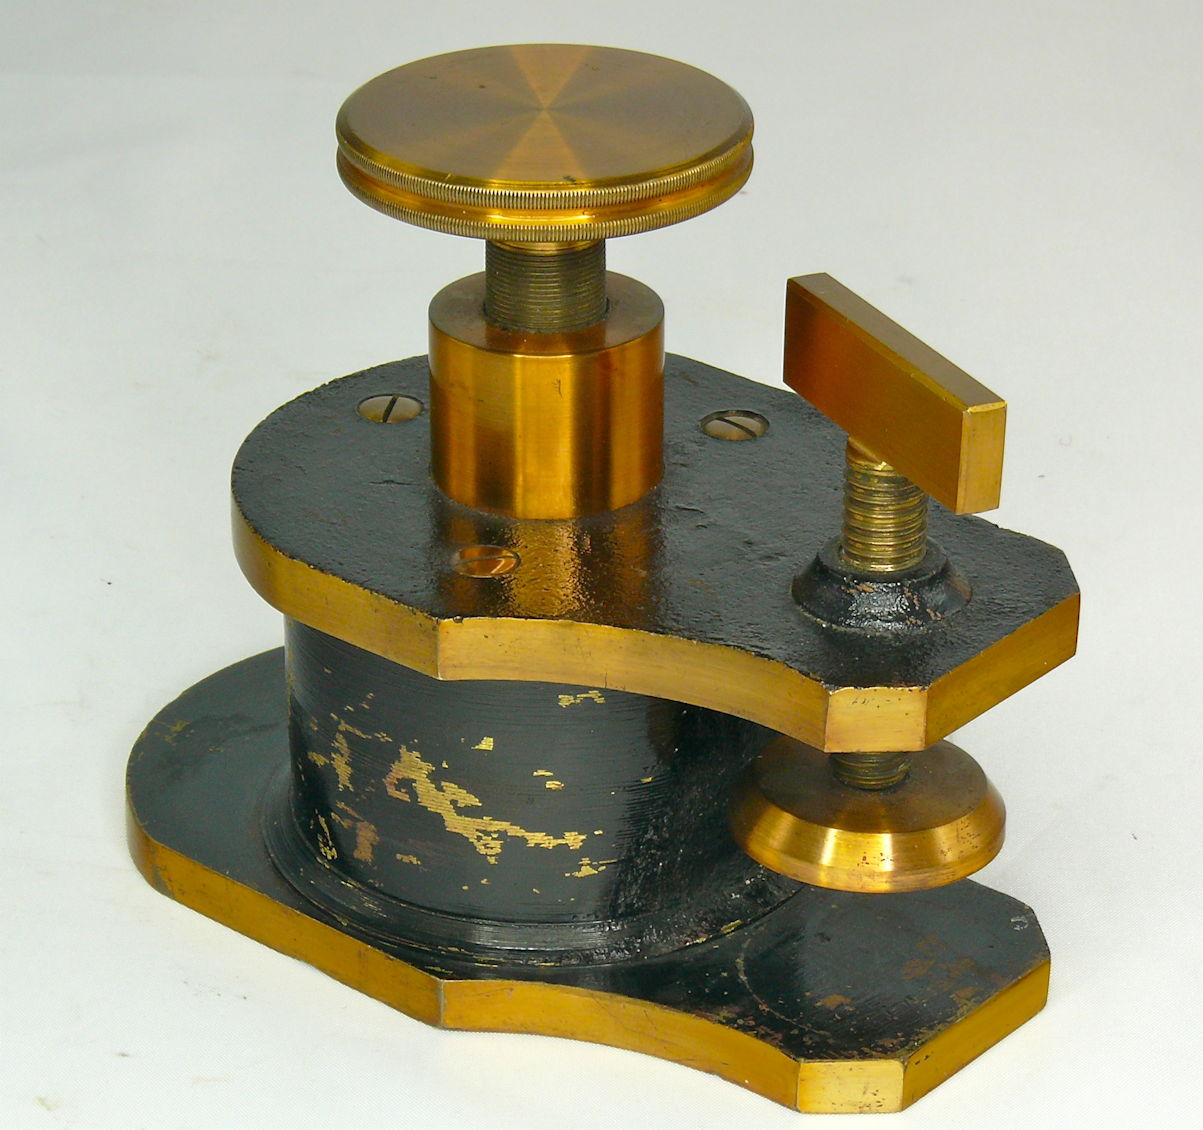 Microtome à main
(type Stirling)